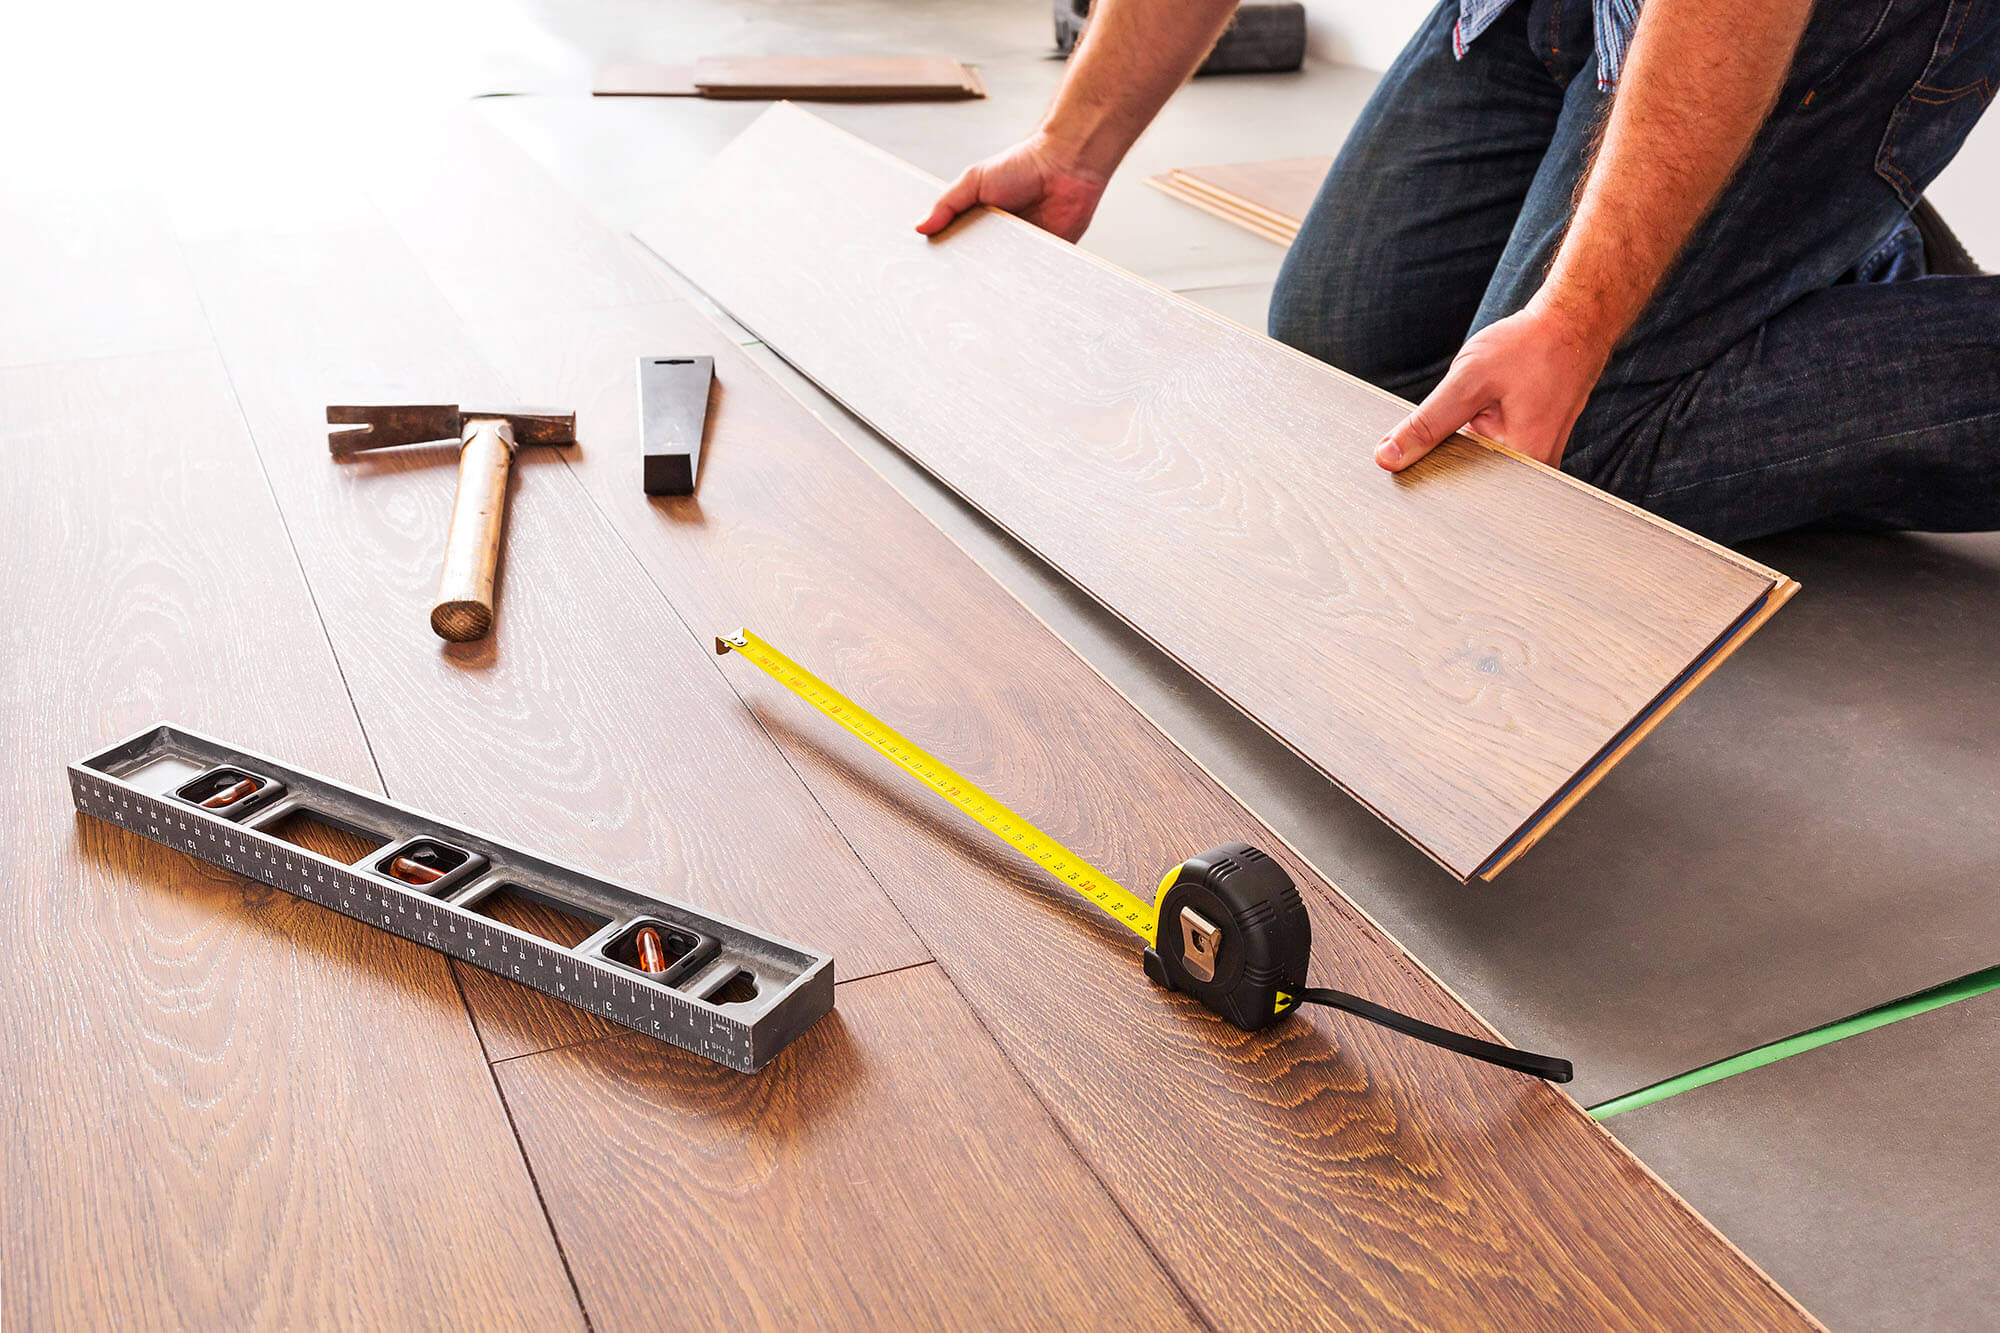 A Man Installing Laminate on the Floor